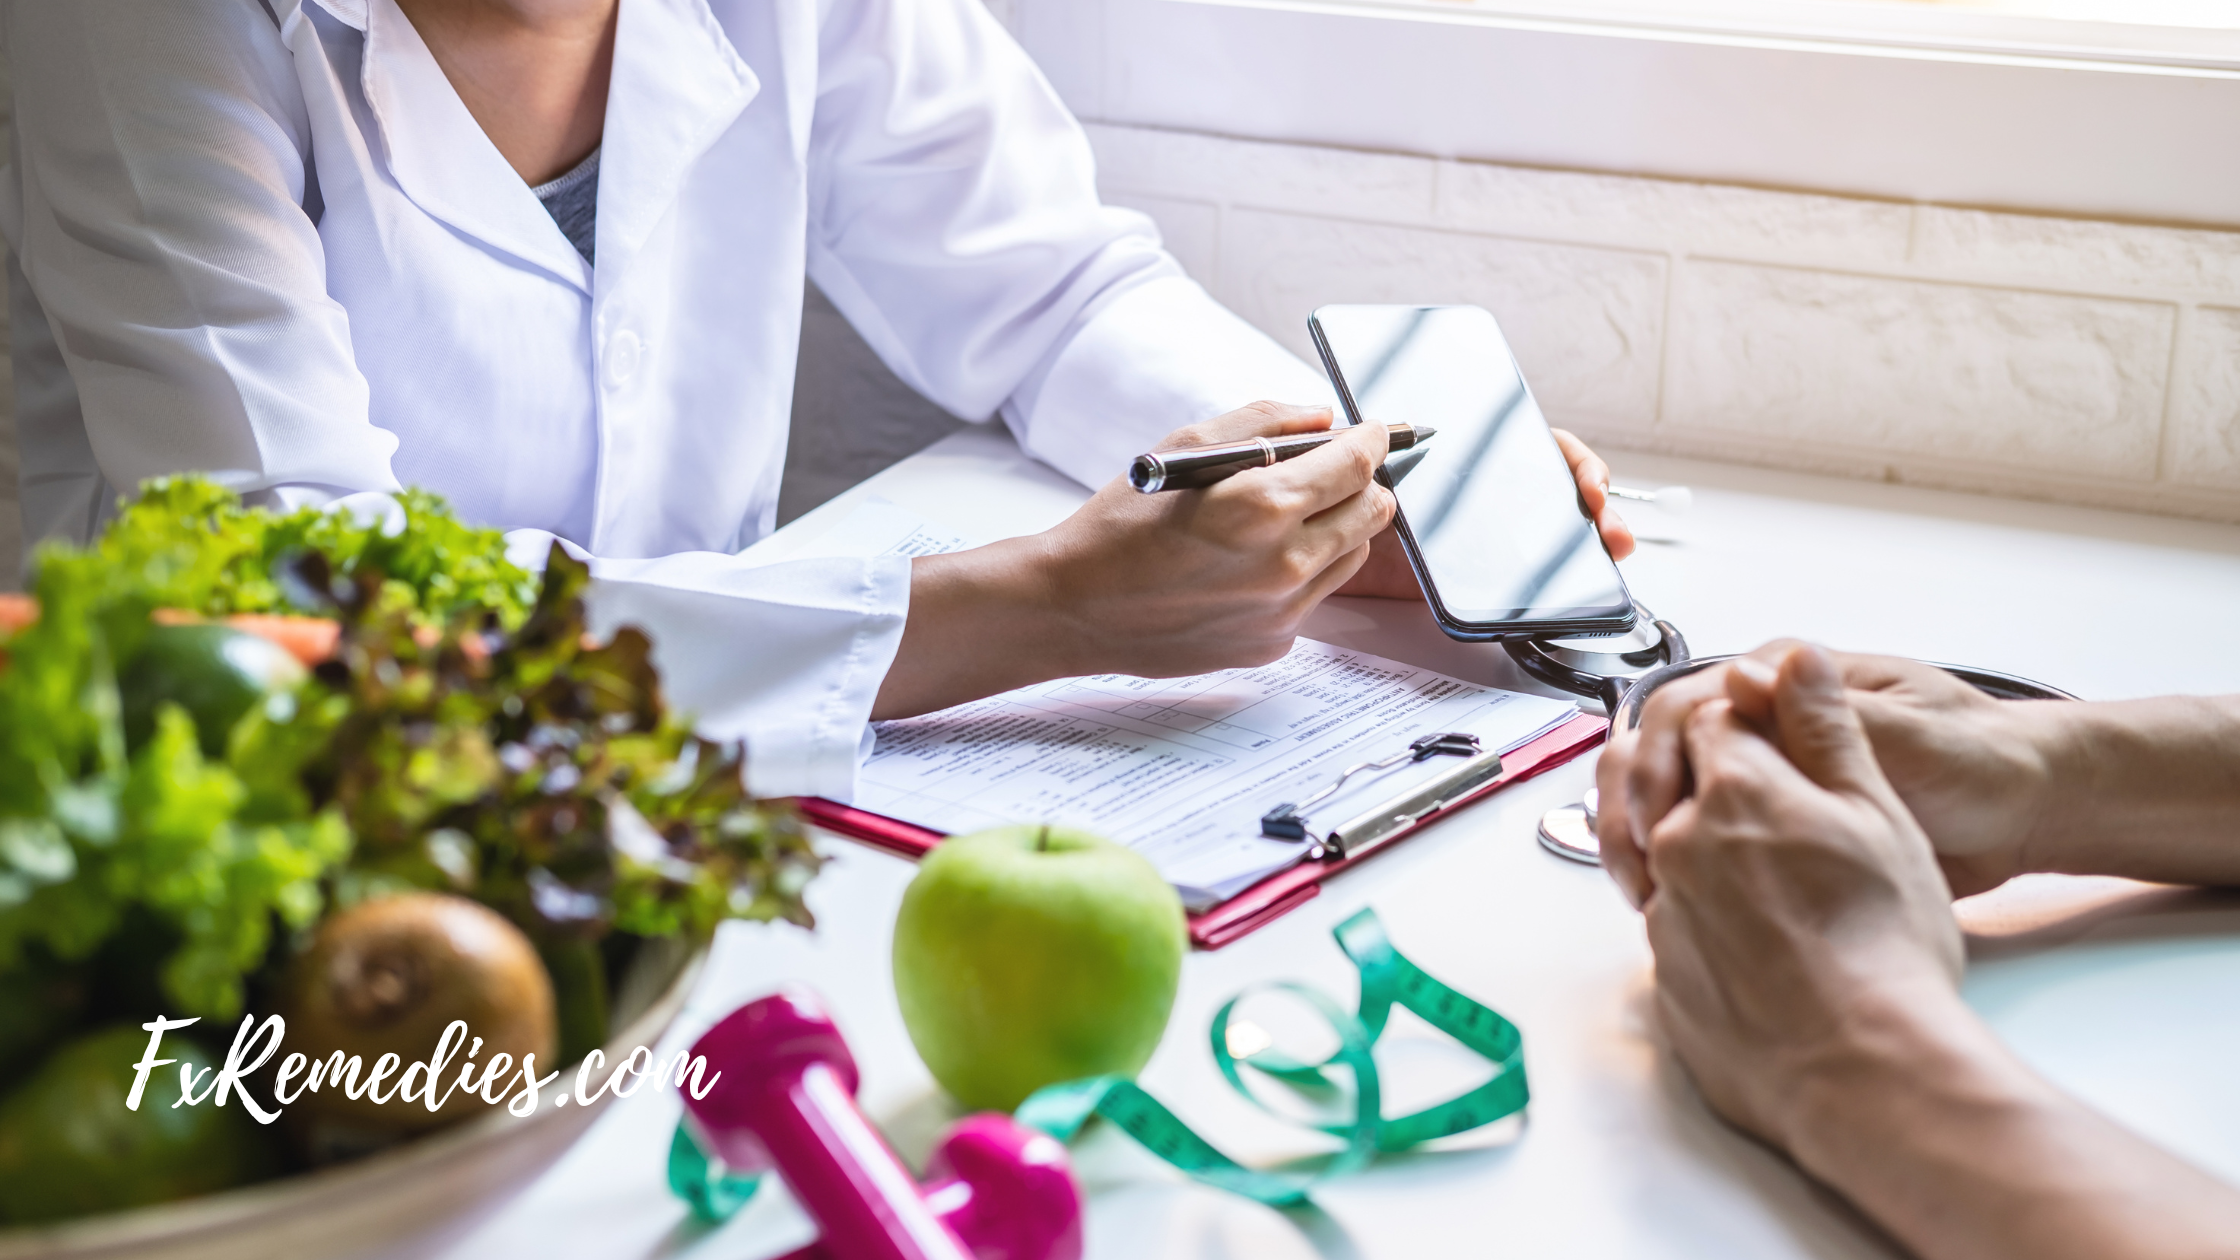 If you've been struggling with health conditions and searching for answers to boost your wellness, exploring the services of a functional medicine nutritionist could be a transformative decision,